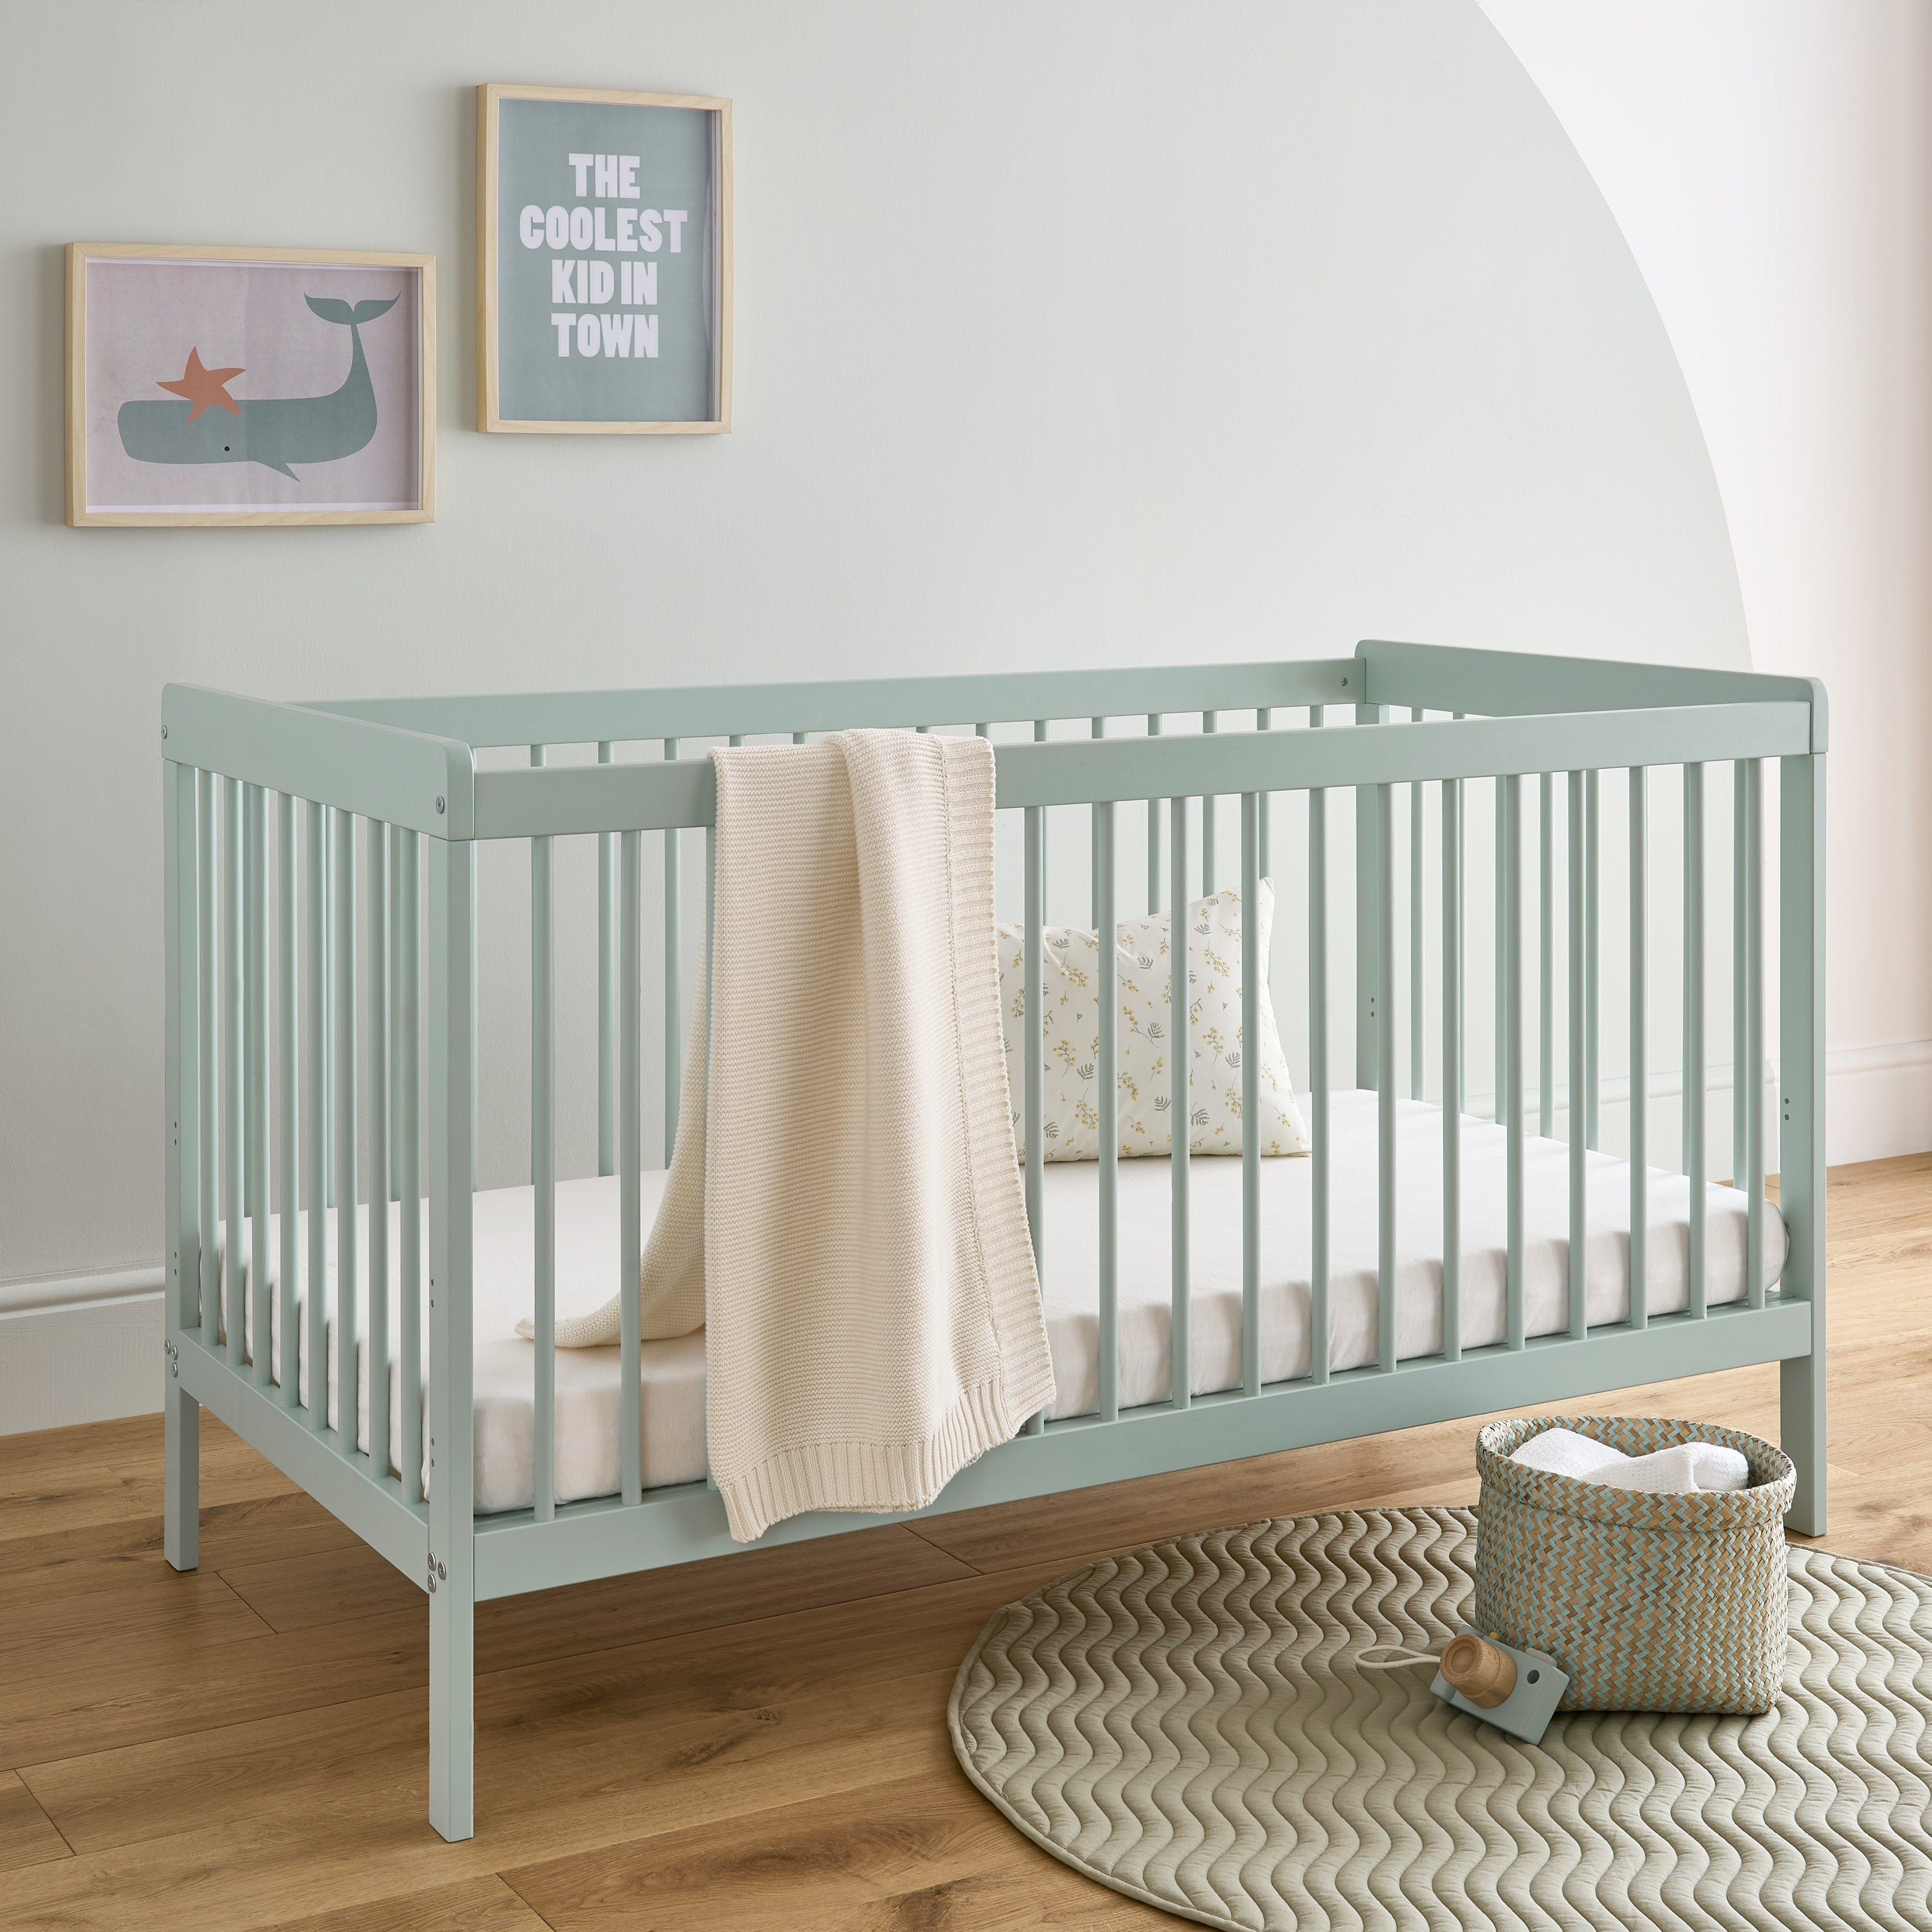 CuddleCo Nola Cot Bed in Sage Green Cot Beds